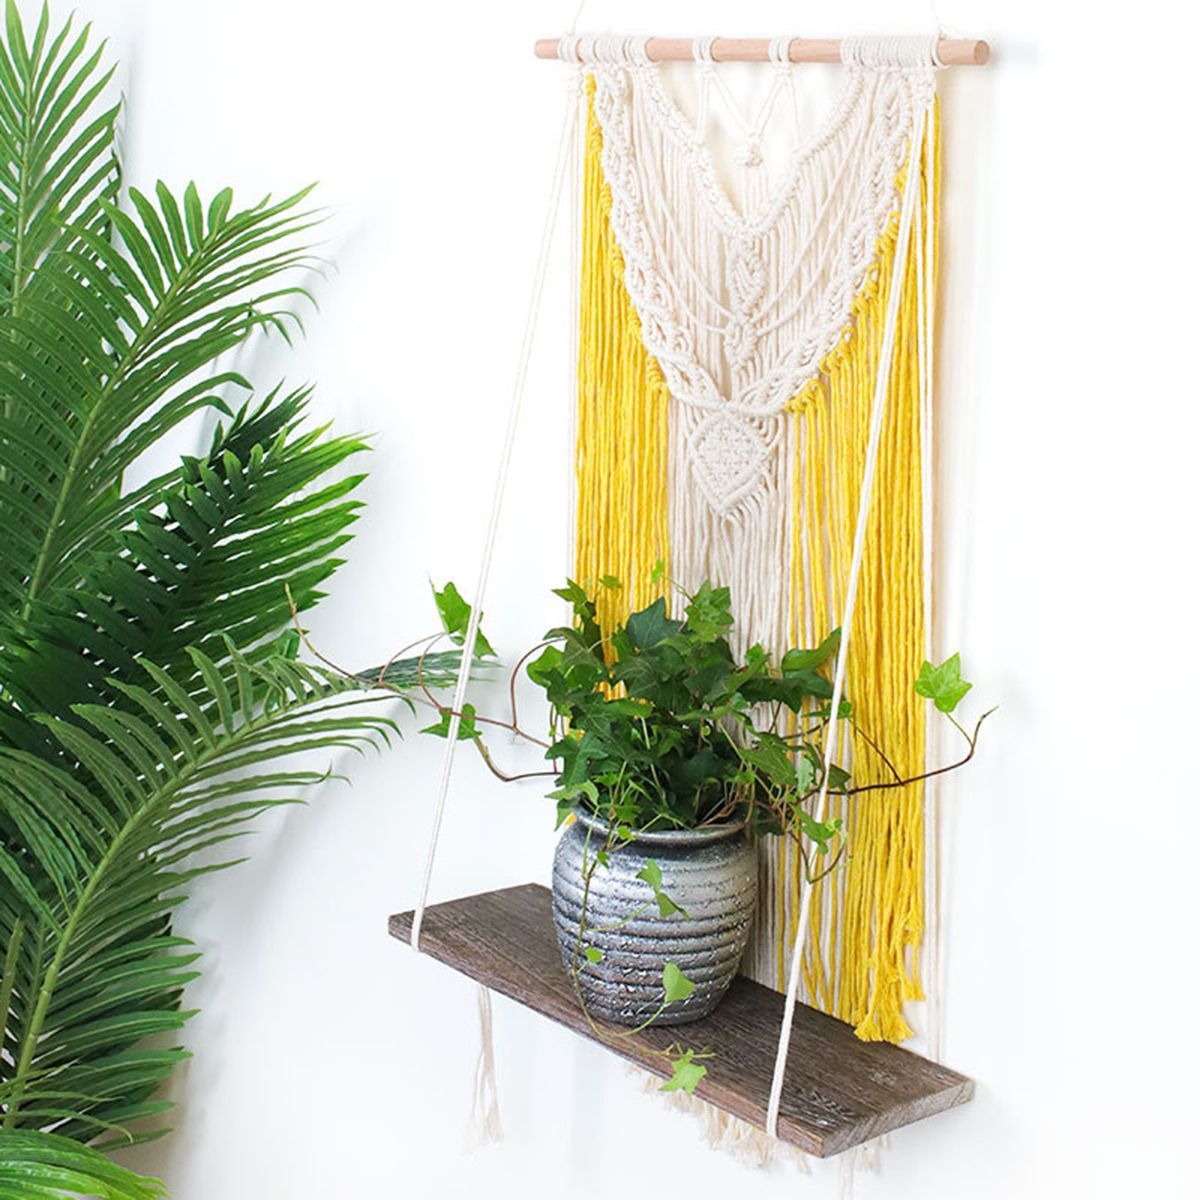 Wall-mounted-Lace-Woven-Macrame-Plant-Hanger-Wall-Cotton-Rope-Tapestry-Shelf-1727270